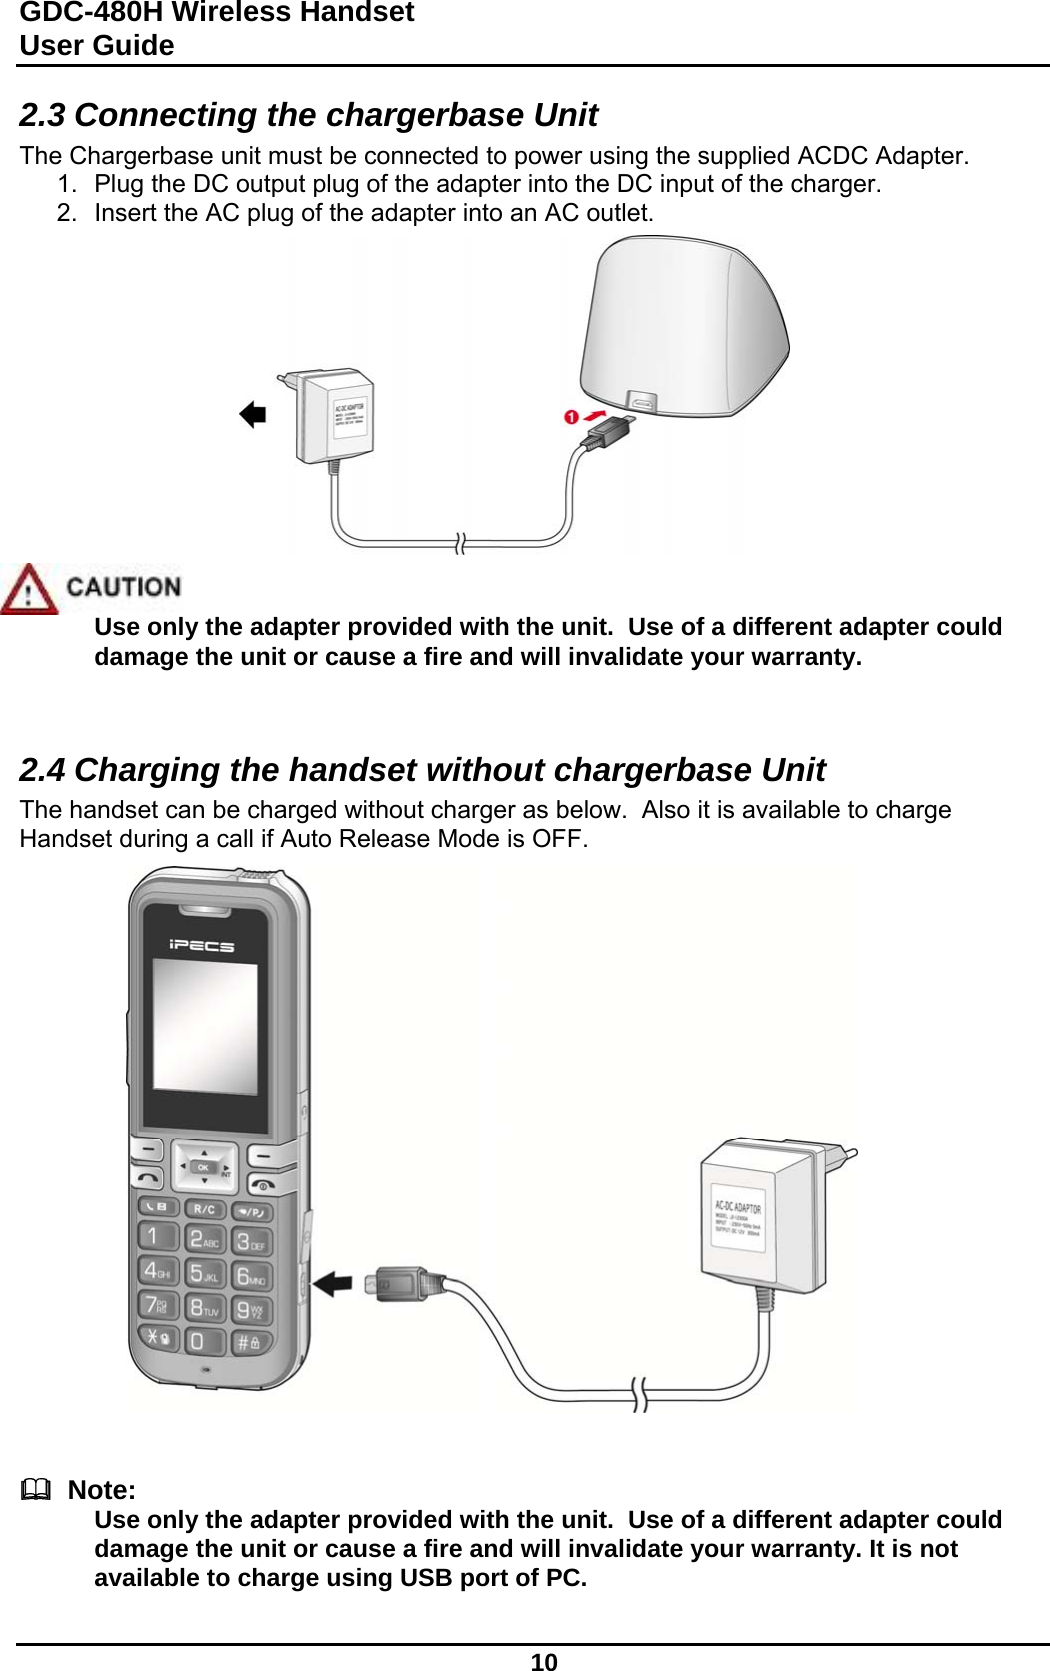 GDC-480H Wireless Handset User Guide   10  2.3 Connecting the chargerbase Unit The Chargerbase unit must be connected to power using the supplied ACDC Adapter.   1.  Plug the DC output plug of the adapter into the DC input of the charger. 2.  Insert the AC plug of the adapter into an AC outlet.               Use only the adapter provided with the unit.  Use of a different adapter could damage the unit or cause a fire and will invalidate your warranty.   2.4 Charging the handset without chargerbase Unit The handset can be charged without charger as below.  Also it is available to charge Handset during a call if Auto Release Mode is OFF.                           Note: Use only the adapter provided with the unit.  Use of a different adapter could damage the unit or cause a fire and will invalidate your warranty. It is not available to charge using USB port of PC.  